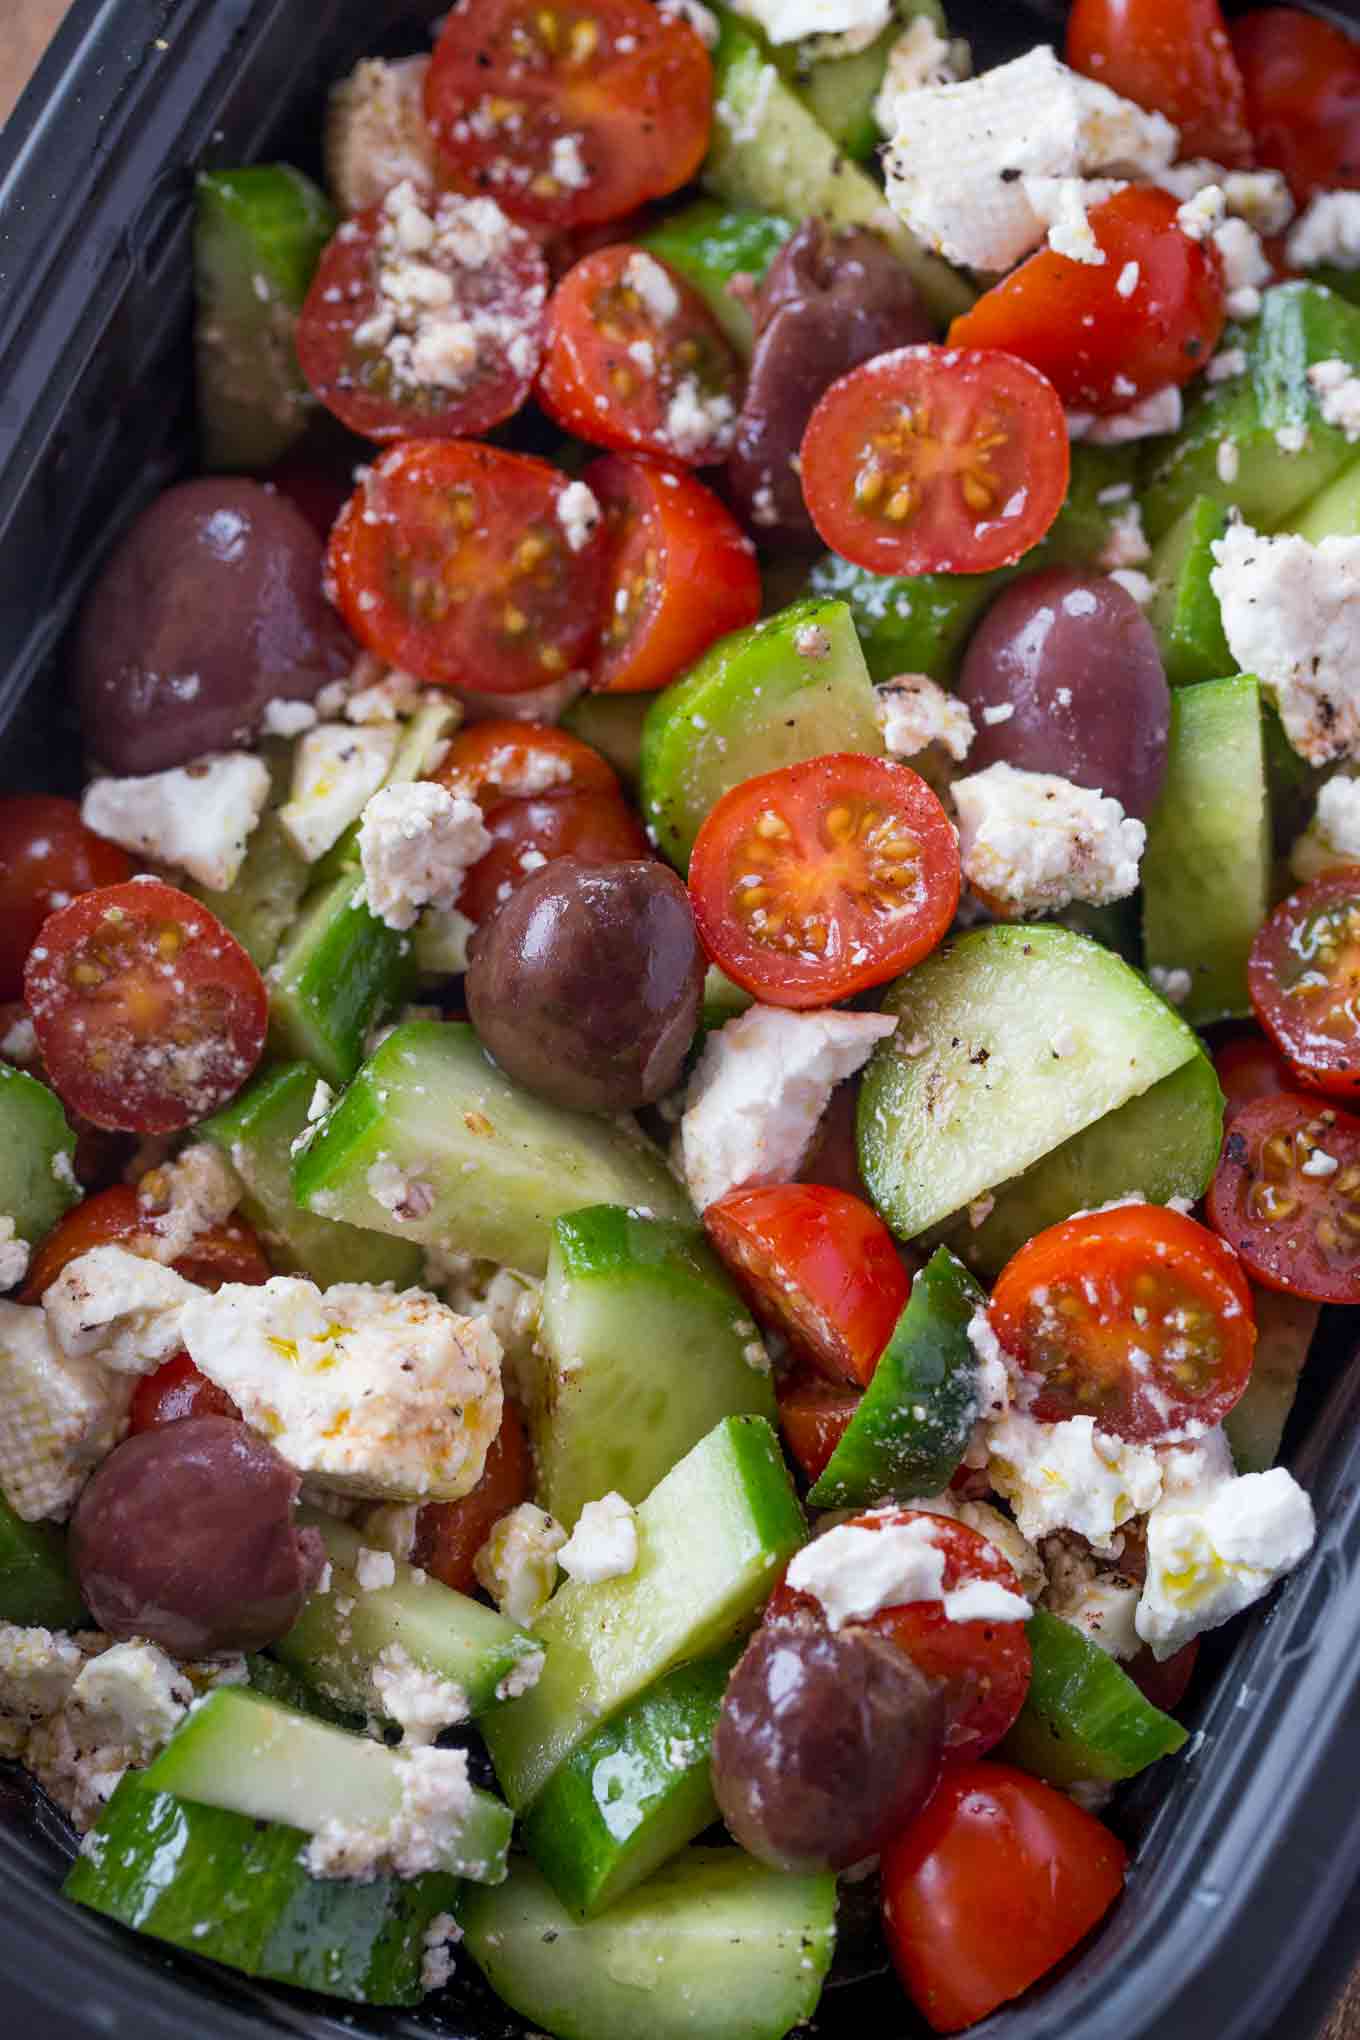 Easy Greek Salad with cucumbers, grape tomatoes, feta cheese and kalamata olives with a lemony red wine vinaigrette dressing in just five minutes.